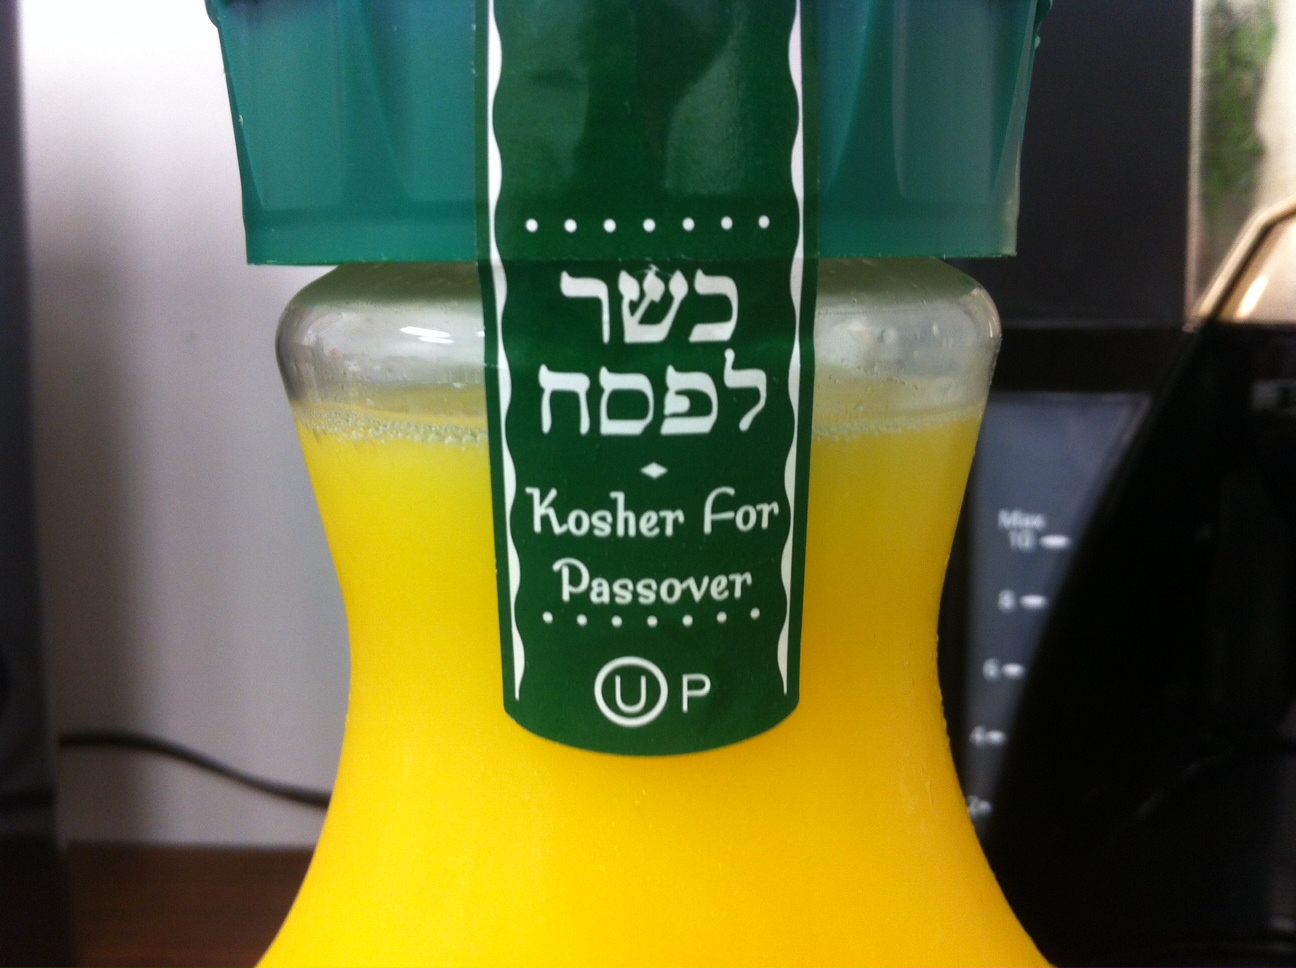 An image of kosher orange juice. Disclosing whether or not a food is kosher is one of the most important cultural labels that food and drink exports should use.